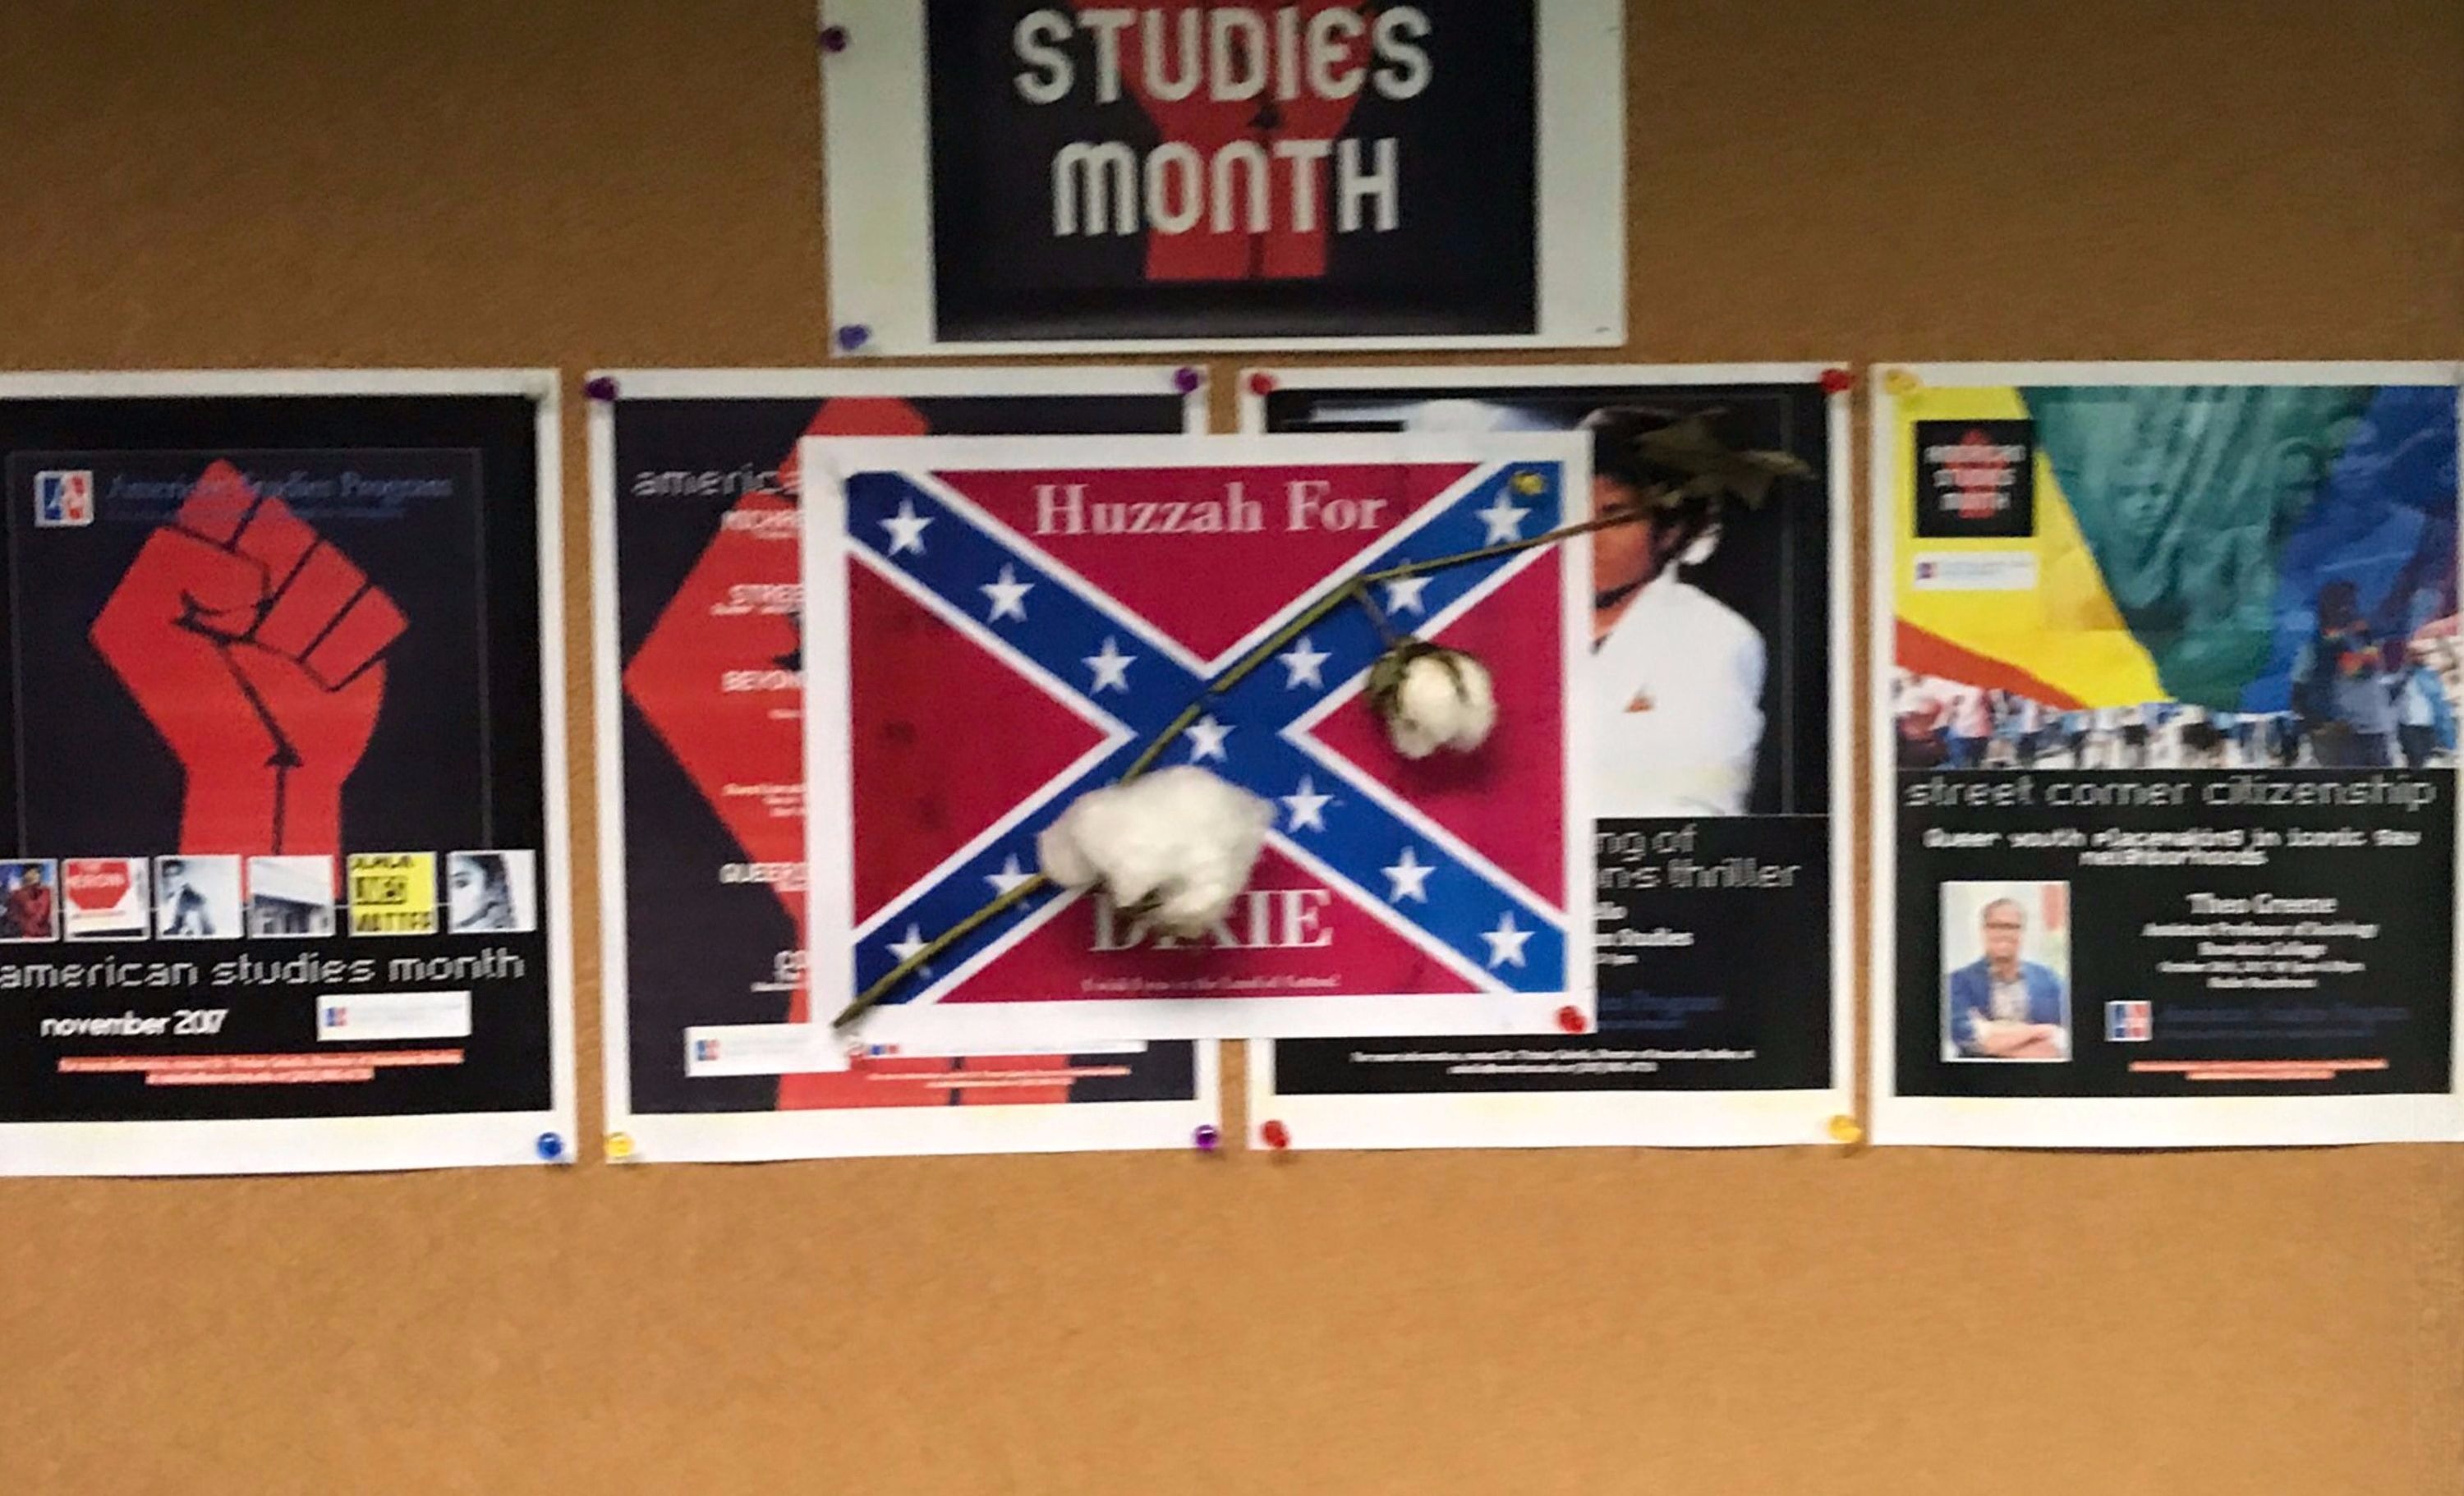 Confederate flag poster with cotton attached found at American University in Washington D.C., U.S., September 26, 2017 in this picture obtained from social media.